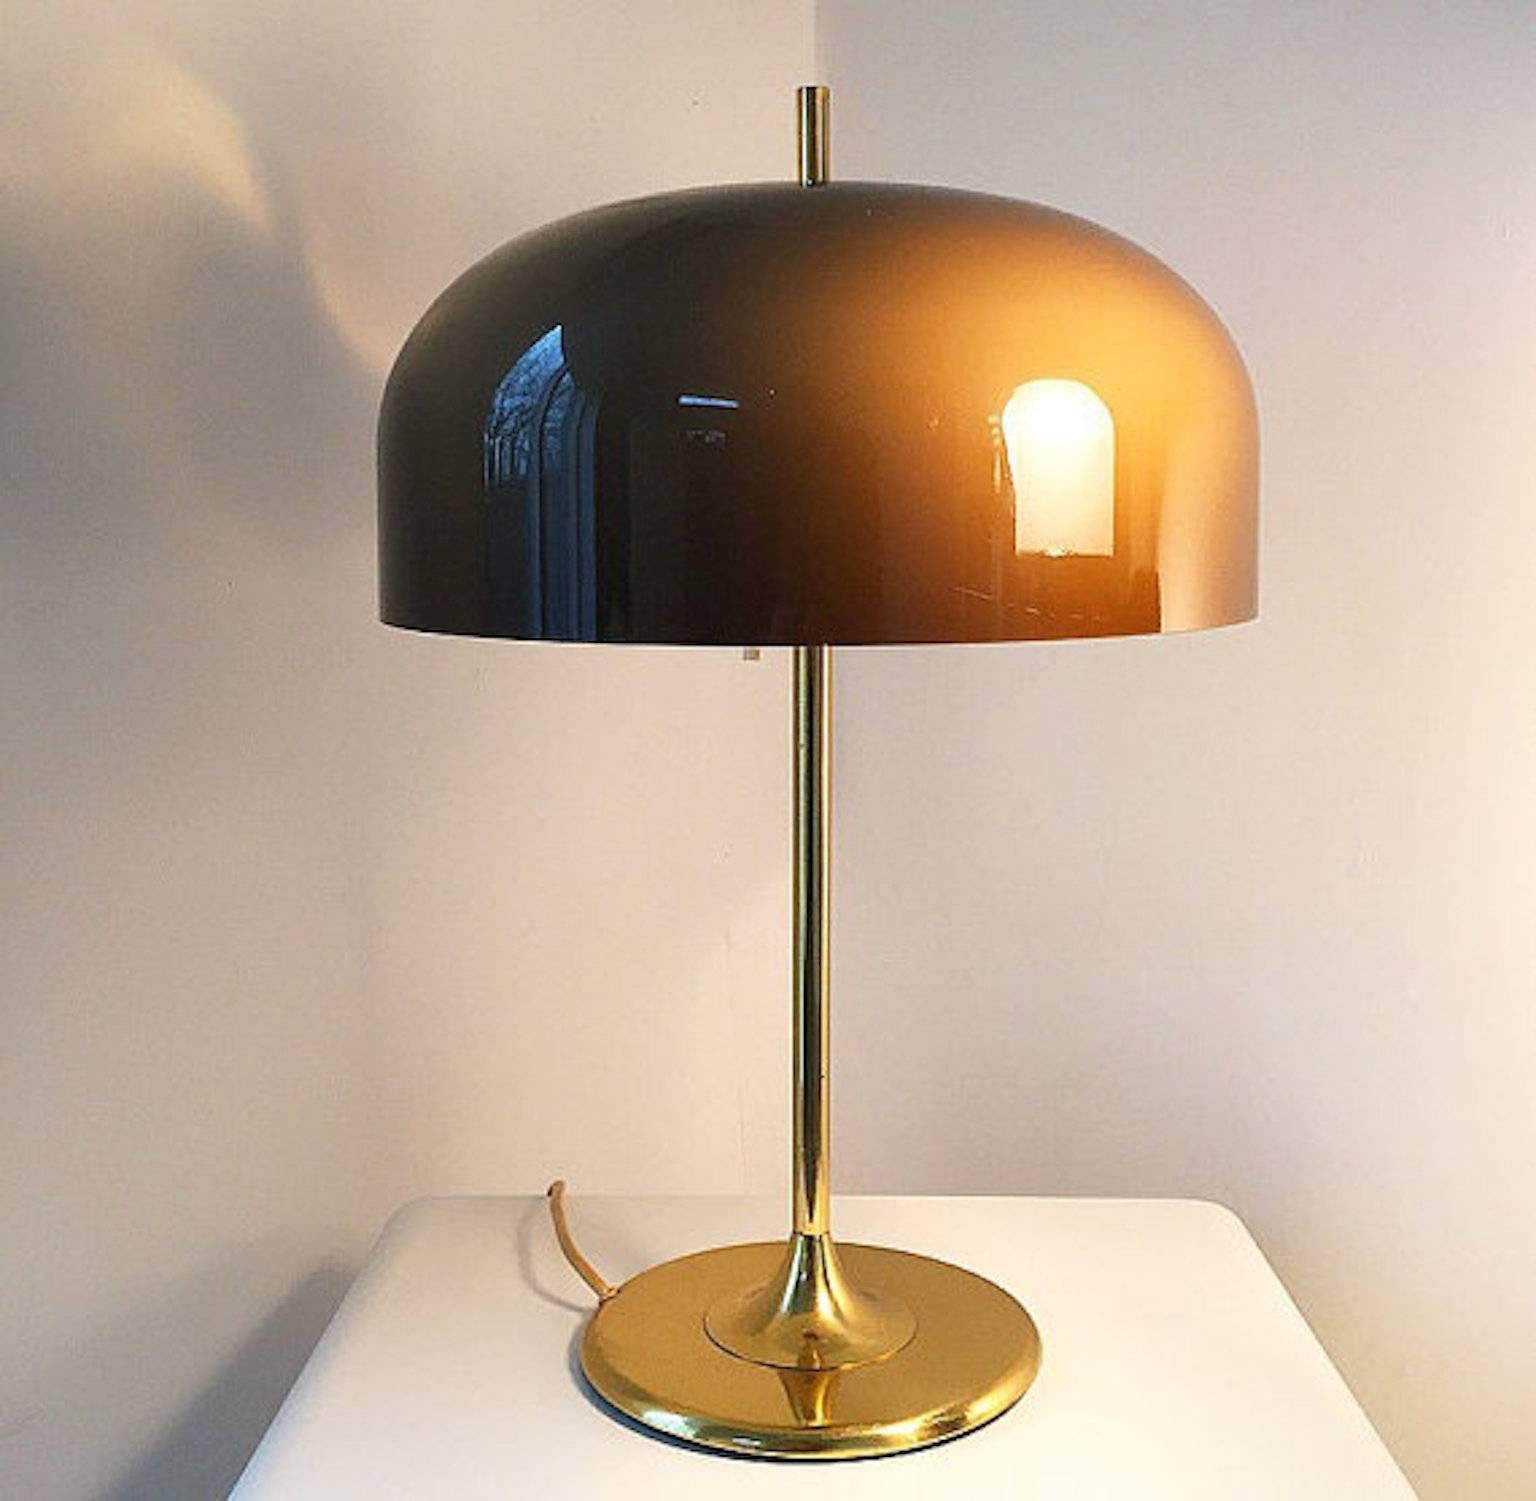 Produced by Meblo attributed to Harvey Guzzini in the early 1970s. 

Elegant shaped mocca colored acrylic shade with milky white acrylic inside. Base and stem is brass alloy and the light consists of two light sockets.

This is indeed a